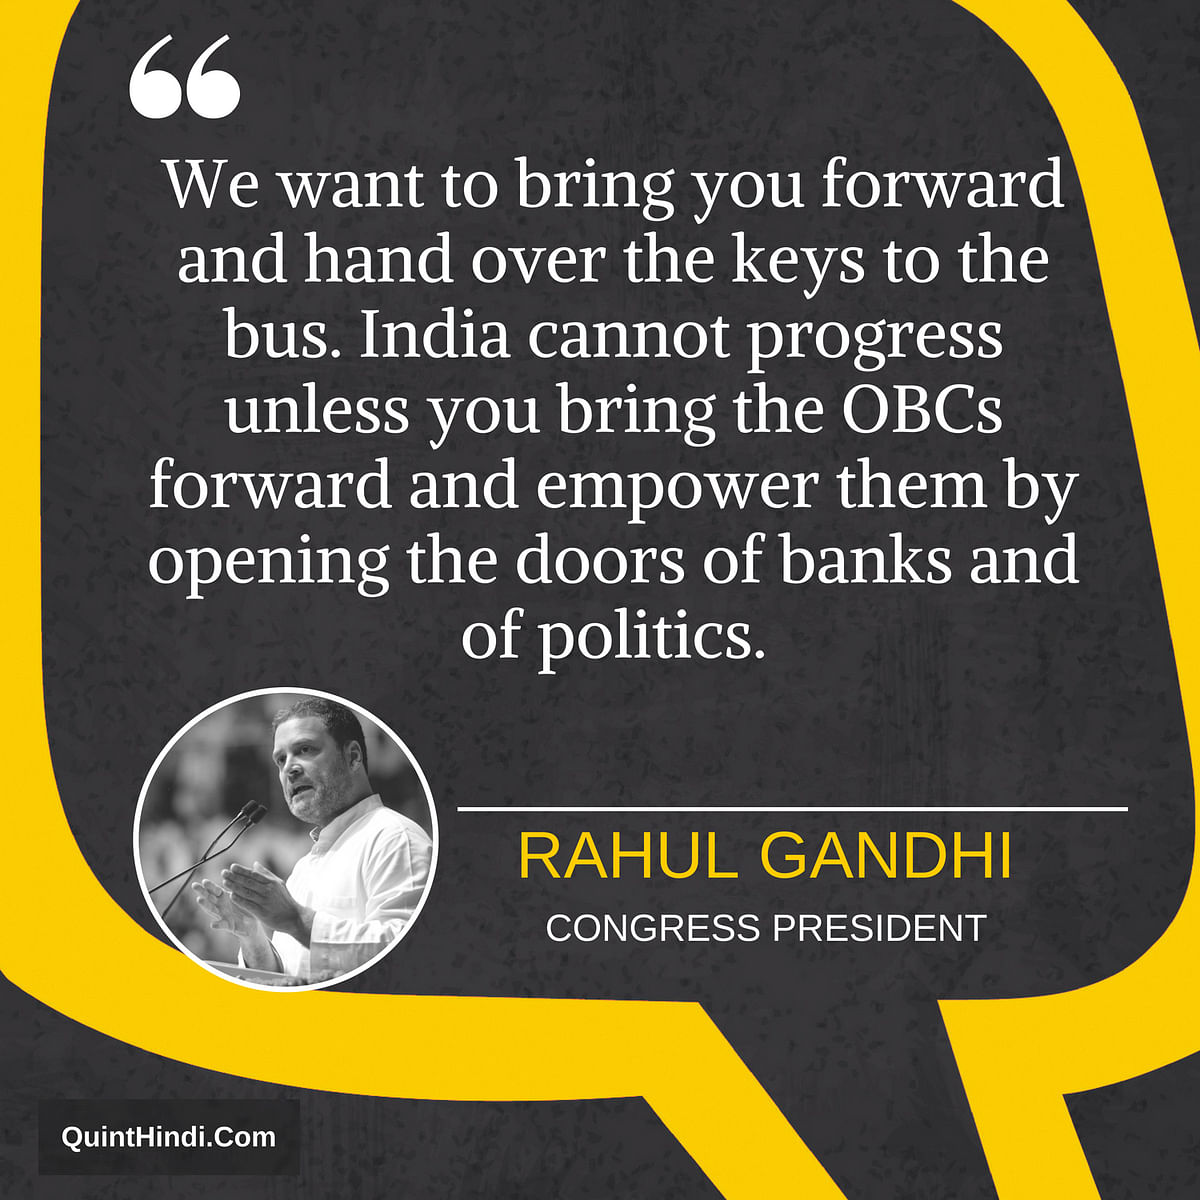 Is Gandhi treading Ram Manohar Lohia’s path of reminding OBCs of their electoral prowess, 60 years down the line?